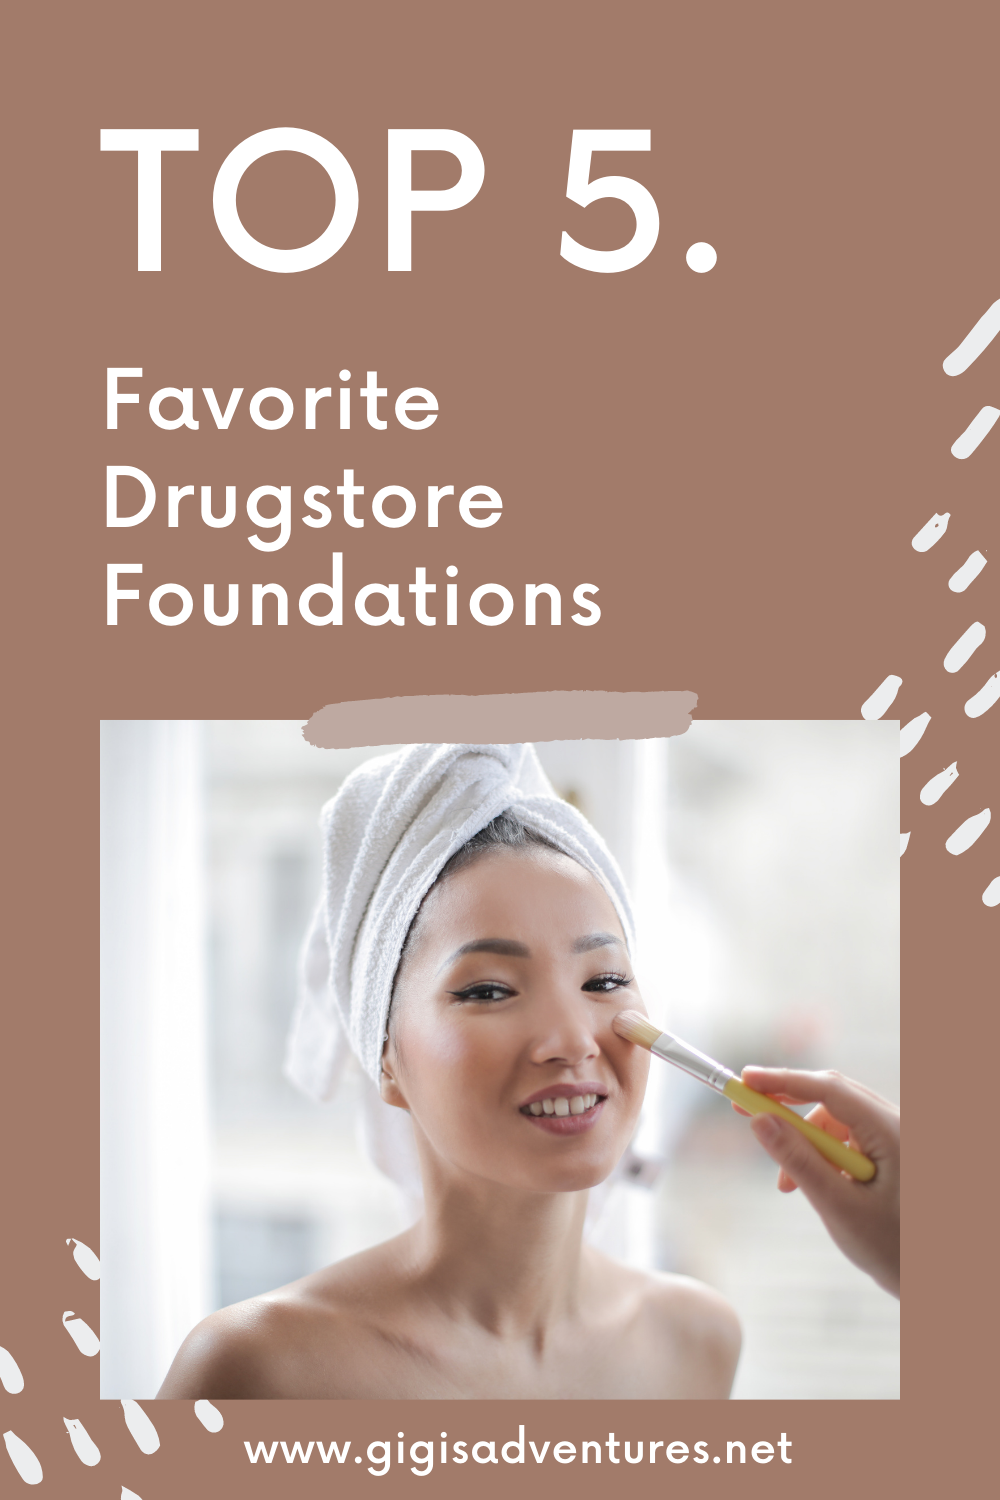 My Top 5 Favorite Drugstore Foundations